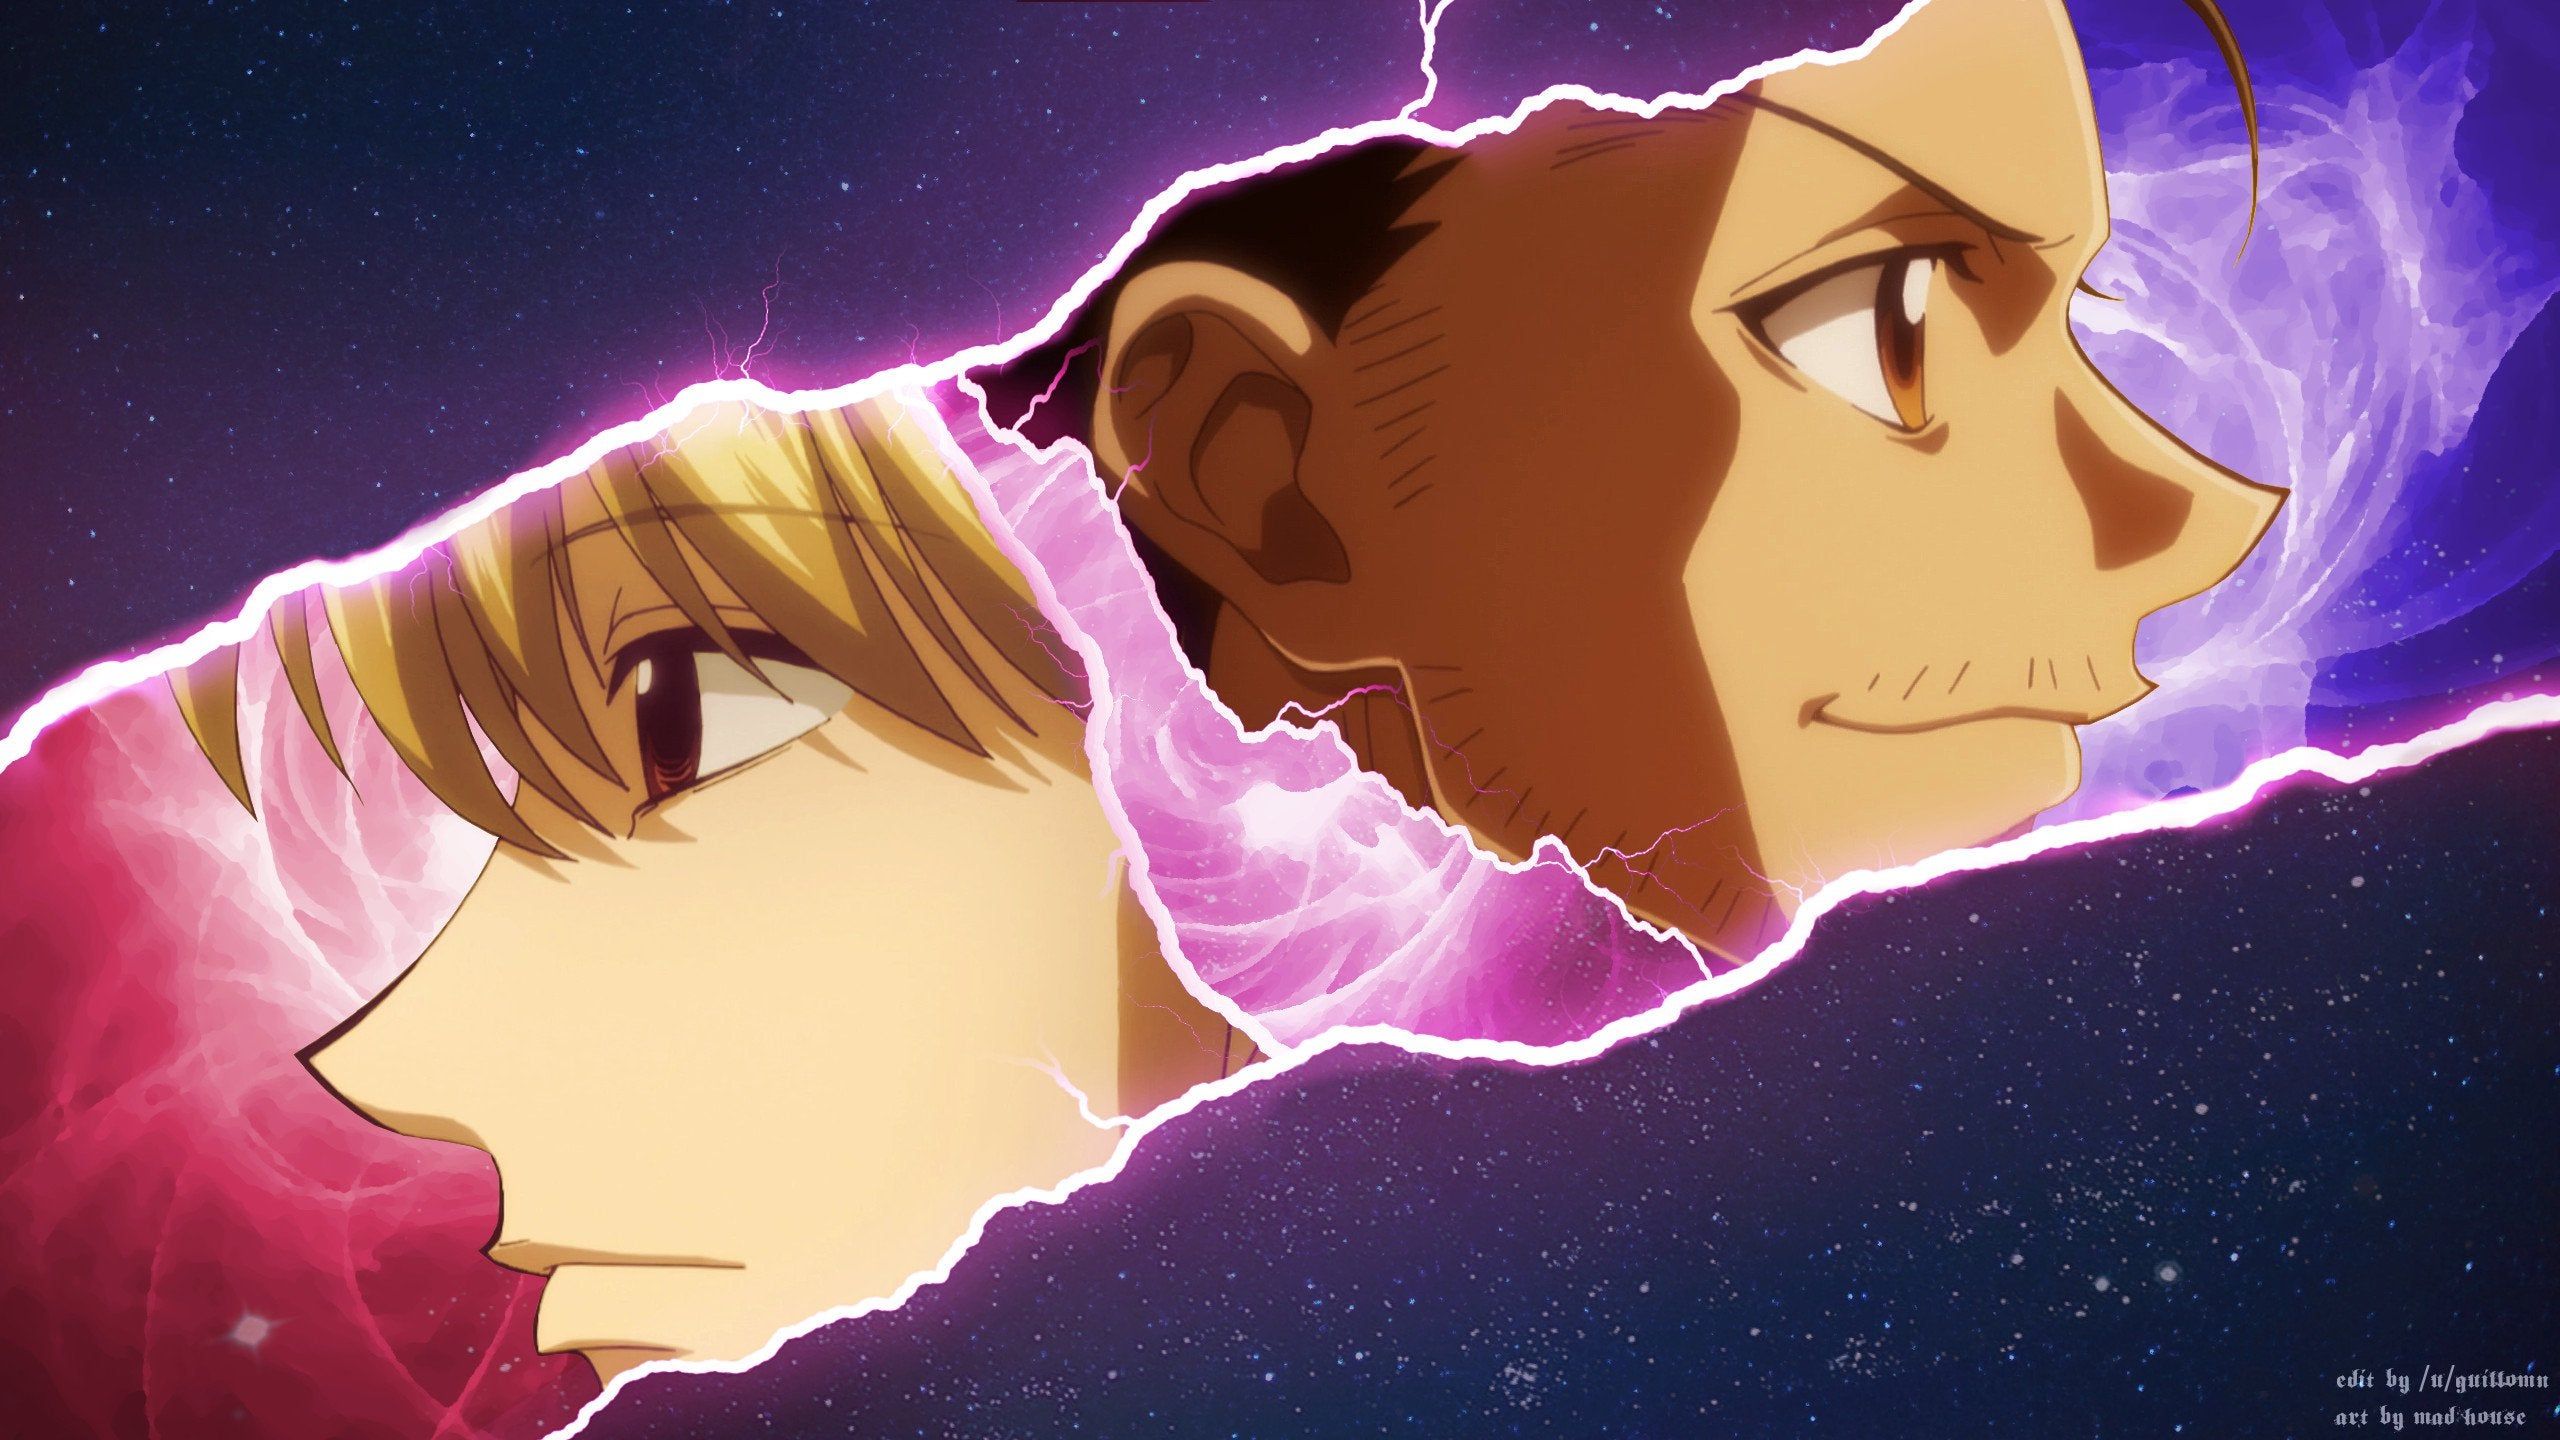 I made a Ging & Pariston desktop wallpaper from the 2011 anime art